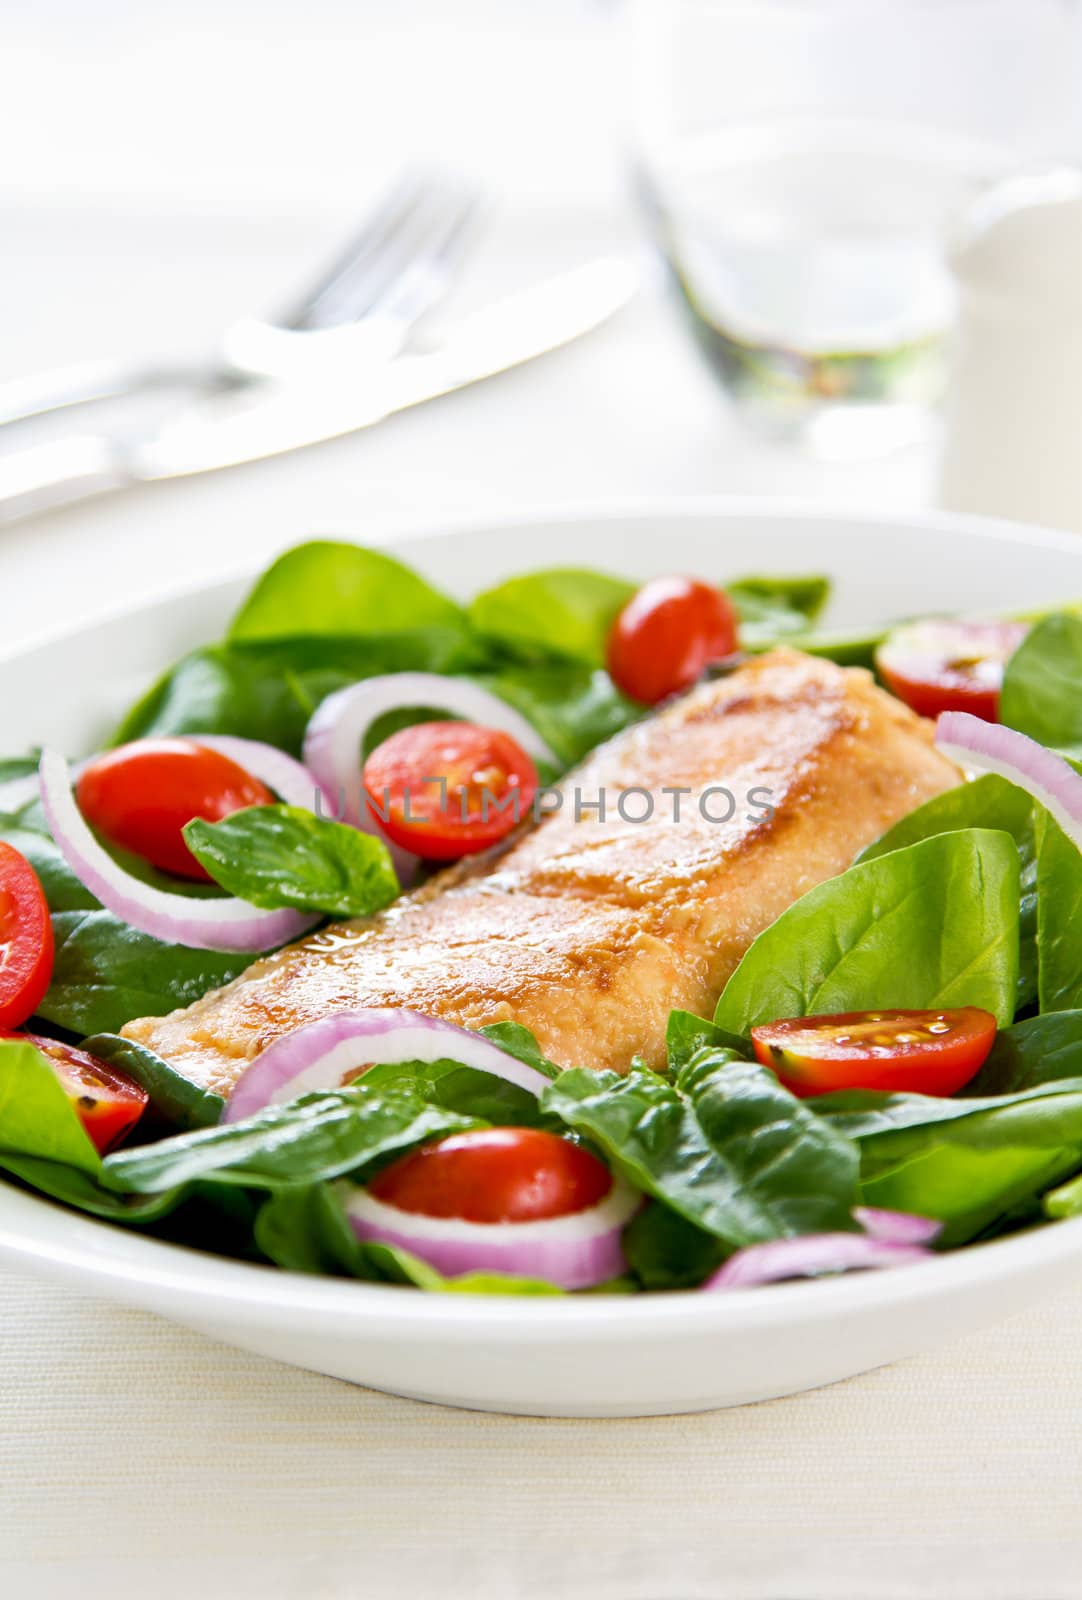 Salmon with Spinach salad by vanillaechoes